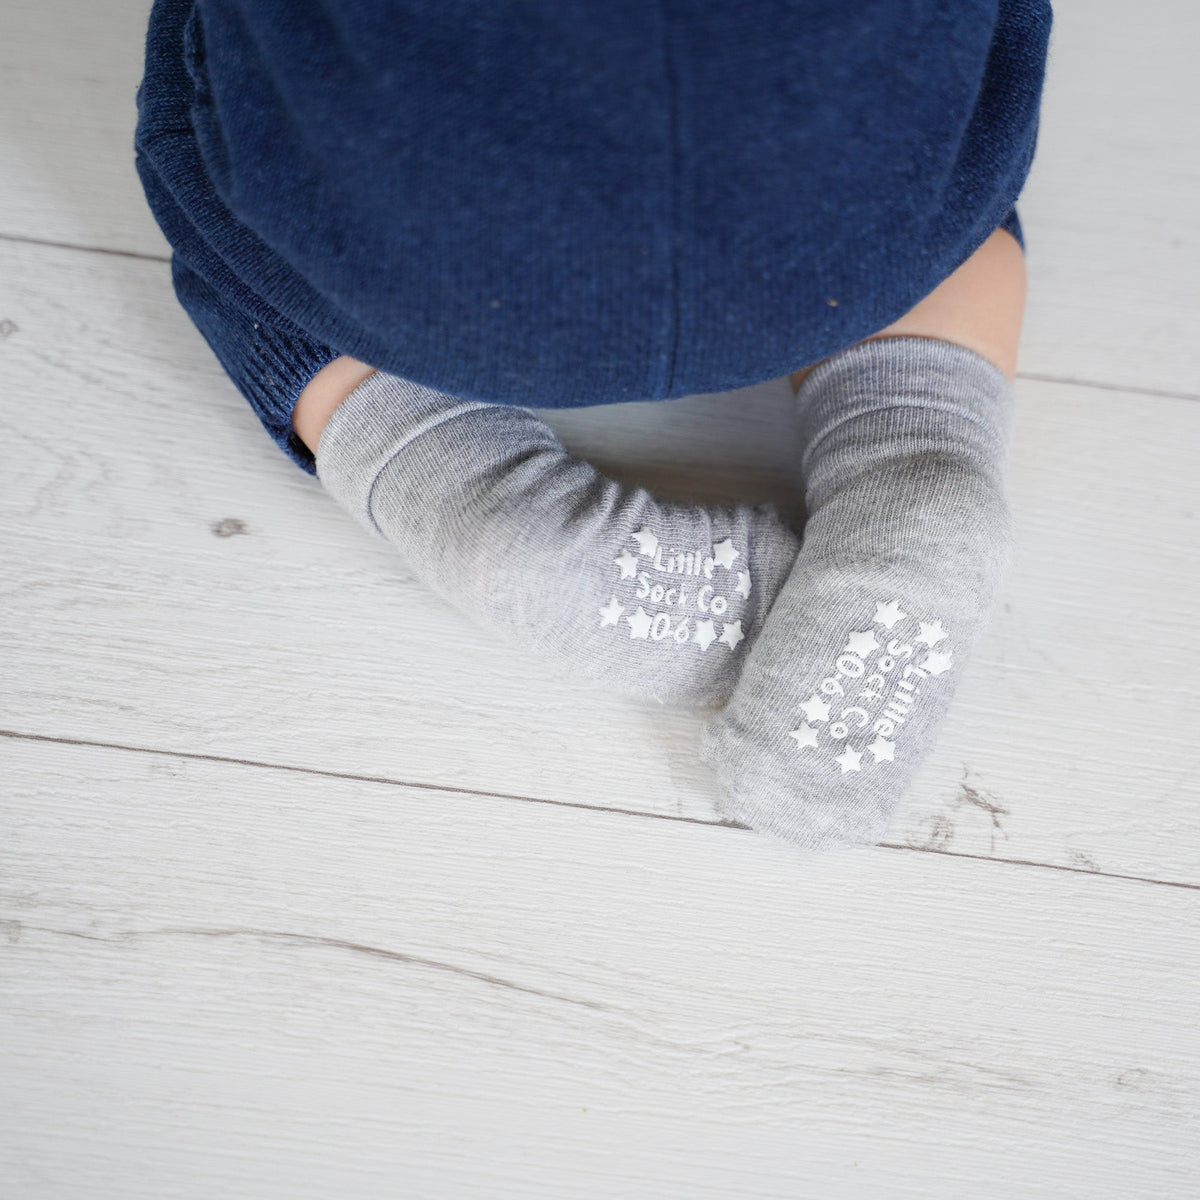 Talipes (clubfoot) Boots and Bar Socks - Non-Slip + Stay On Baby and Toddler Socks - 3 Pack in Oatmeal, Mustard & Grey Marl